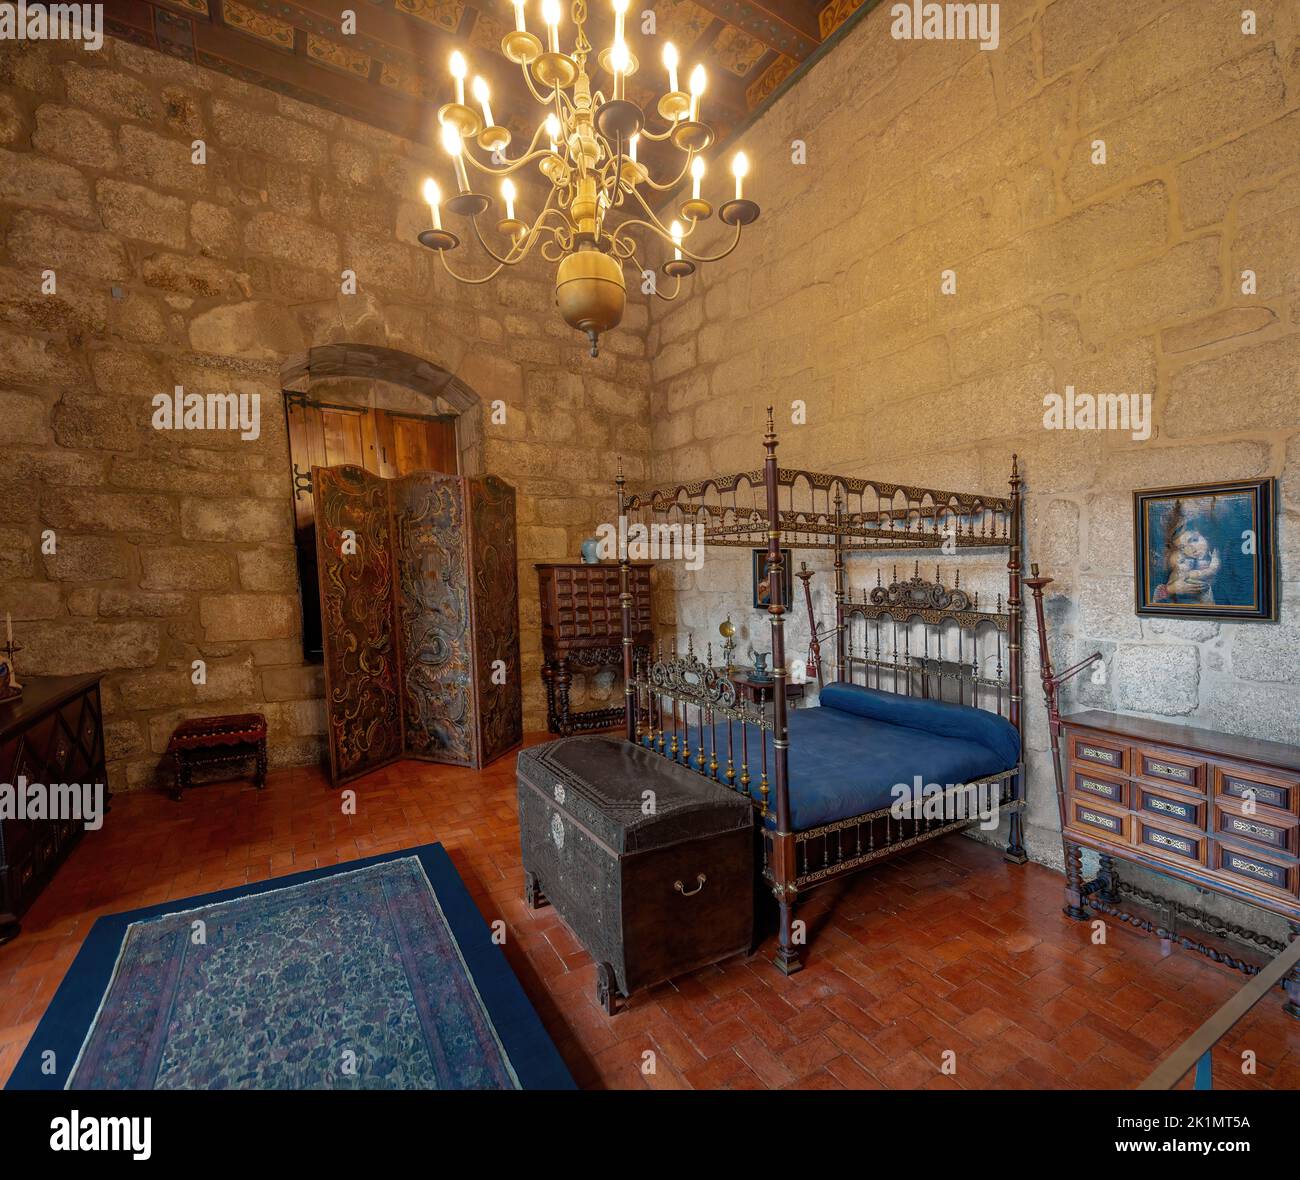 Bedchamber at Palace of the Dukes of Braganza Interior - Guimaraes, Portugal Stock Photo